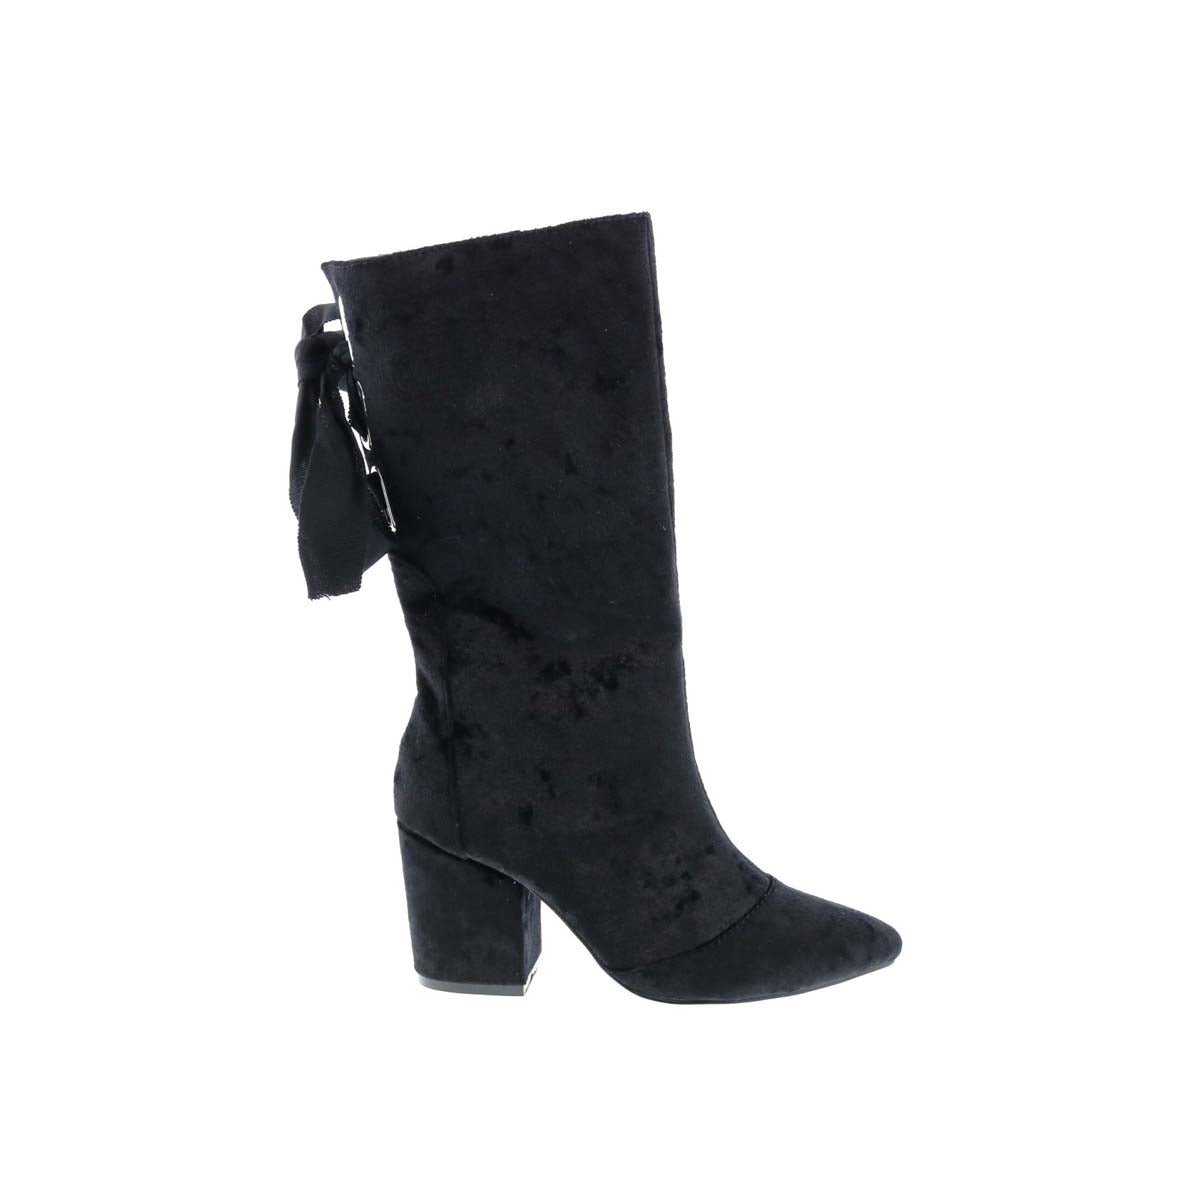 PENNY LOVES KENNY TRACE WOMEN BOOT IN BLACK CRUSHED VELVET - TLW Shoes